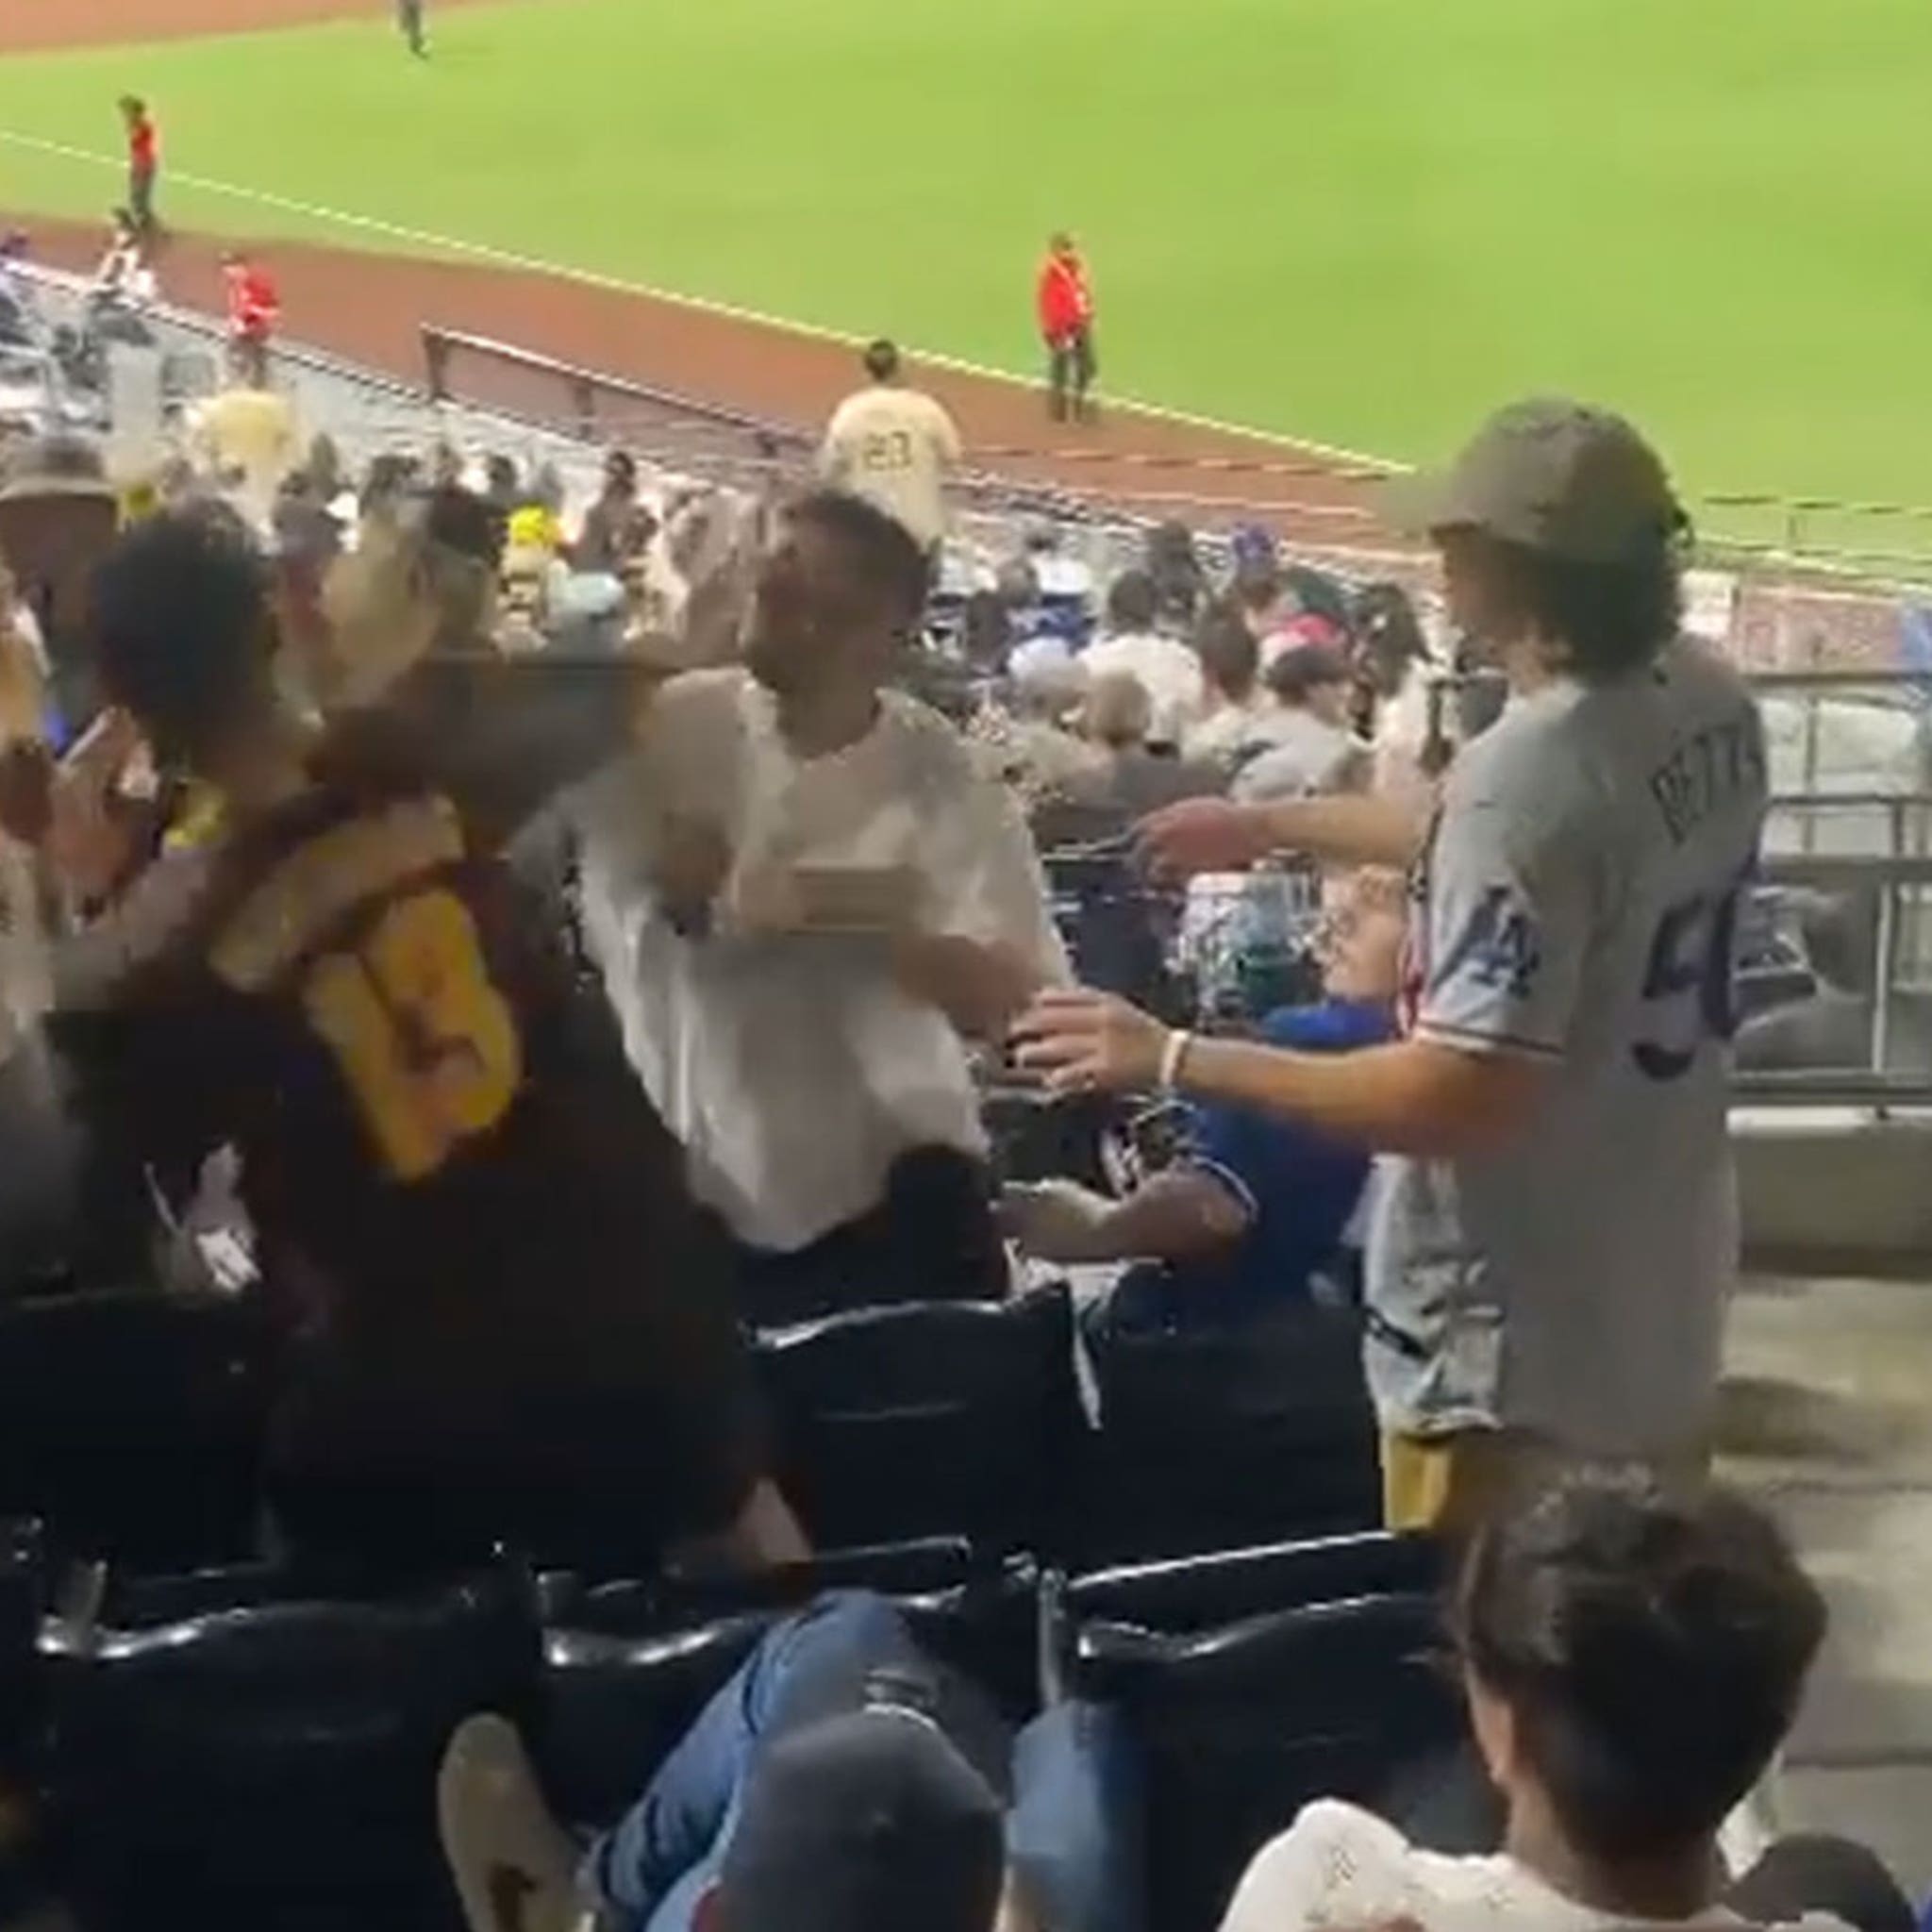 Dodgers And Padres Fans React To San Diego Beating L.A.